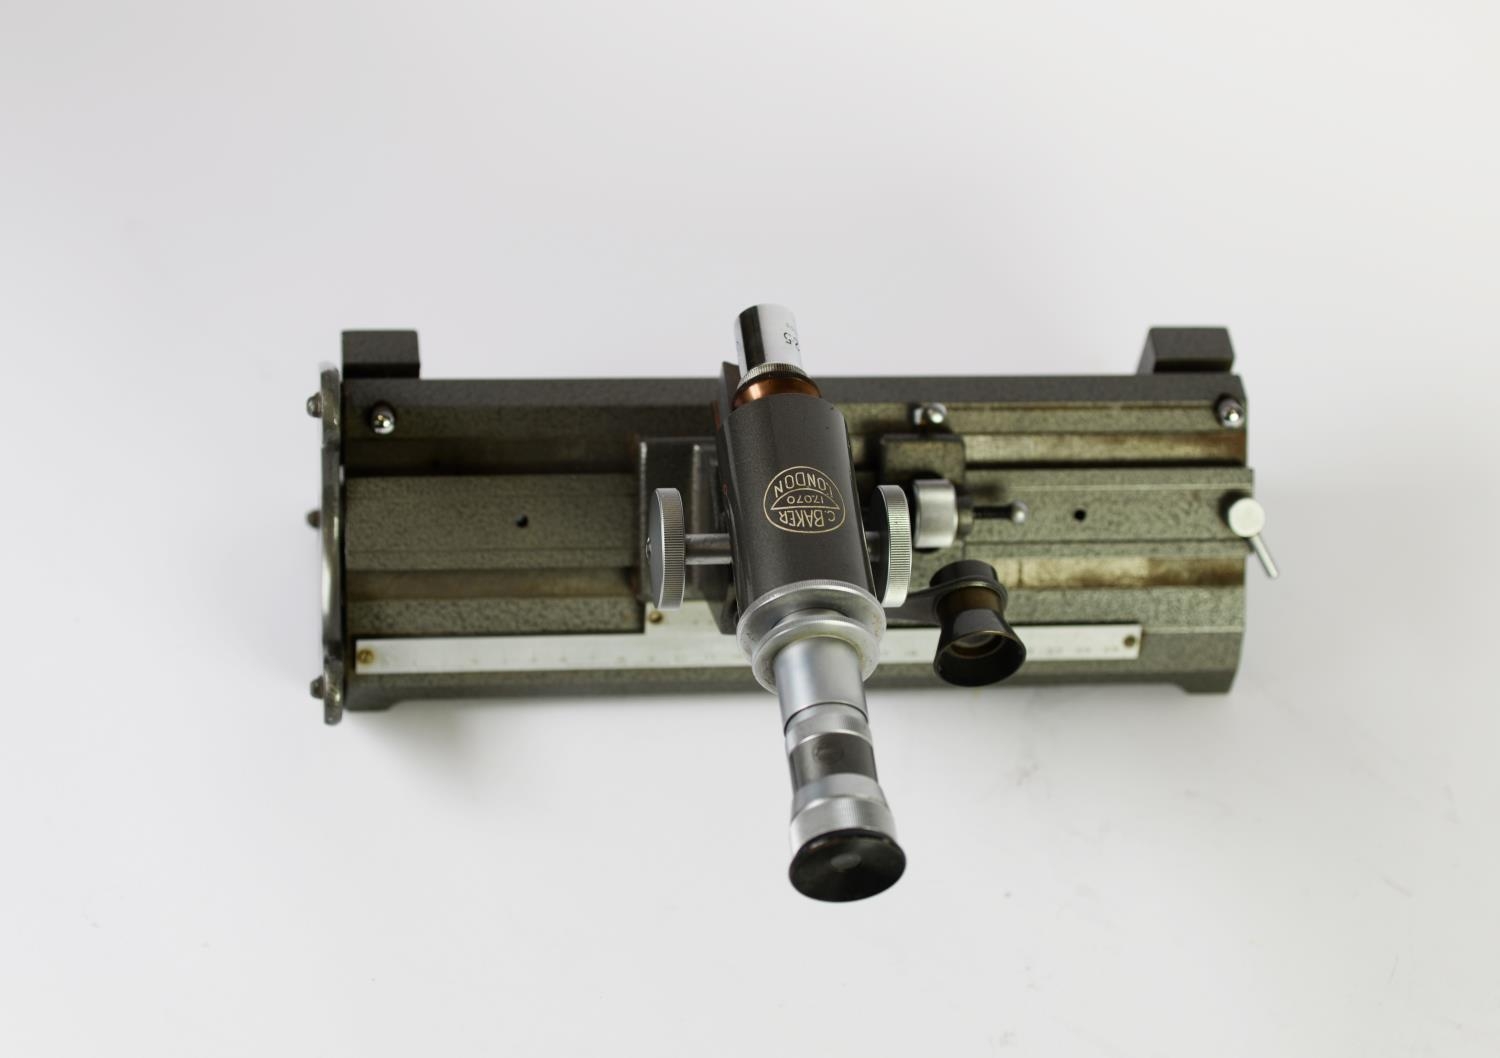 C. BAKER, LONDON, TRAVELLING PRECISION ENGINEERING VERNIER, MICROSCOPE, heavy cast metal with